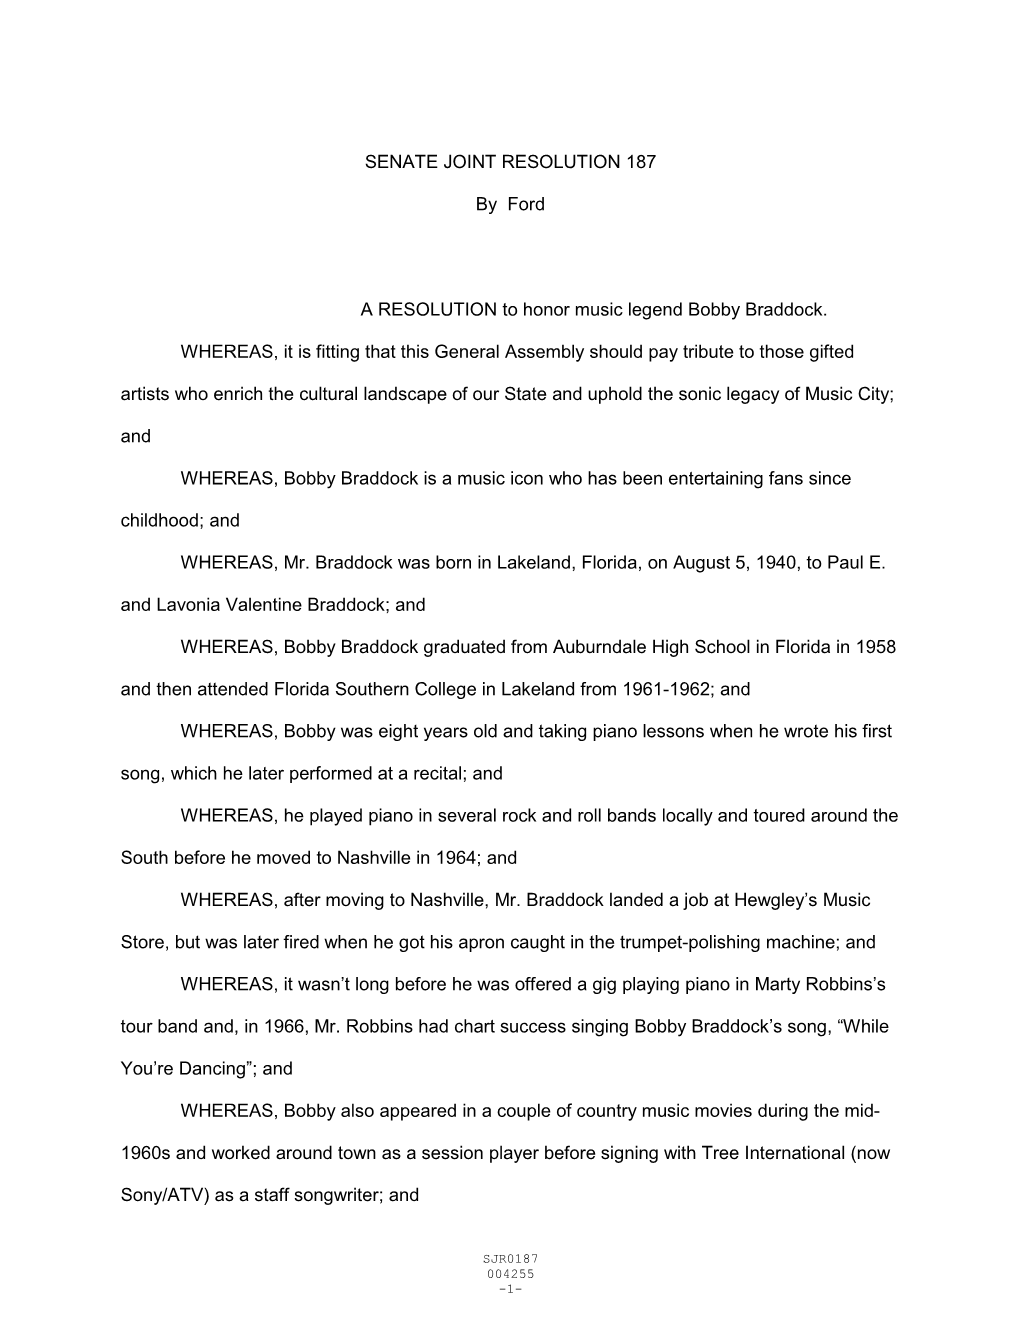 SENATE JOINT RESOLUTION 187 by Ford a RESOLUTION to Honor Music Legend Bobby Braddock. WHEREAS, It Is Fitting That This Genera